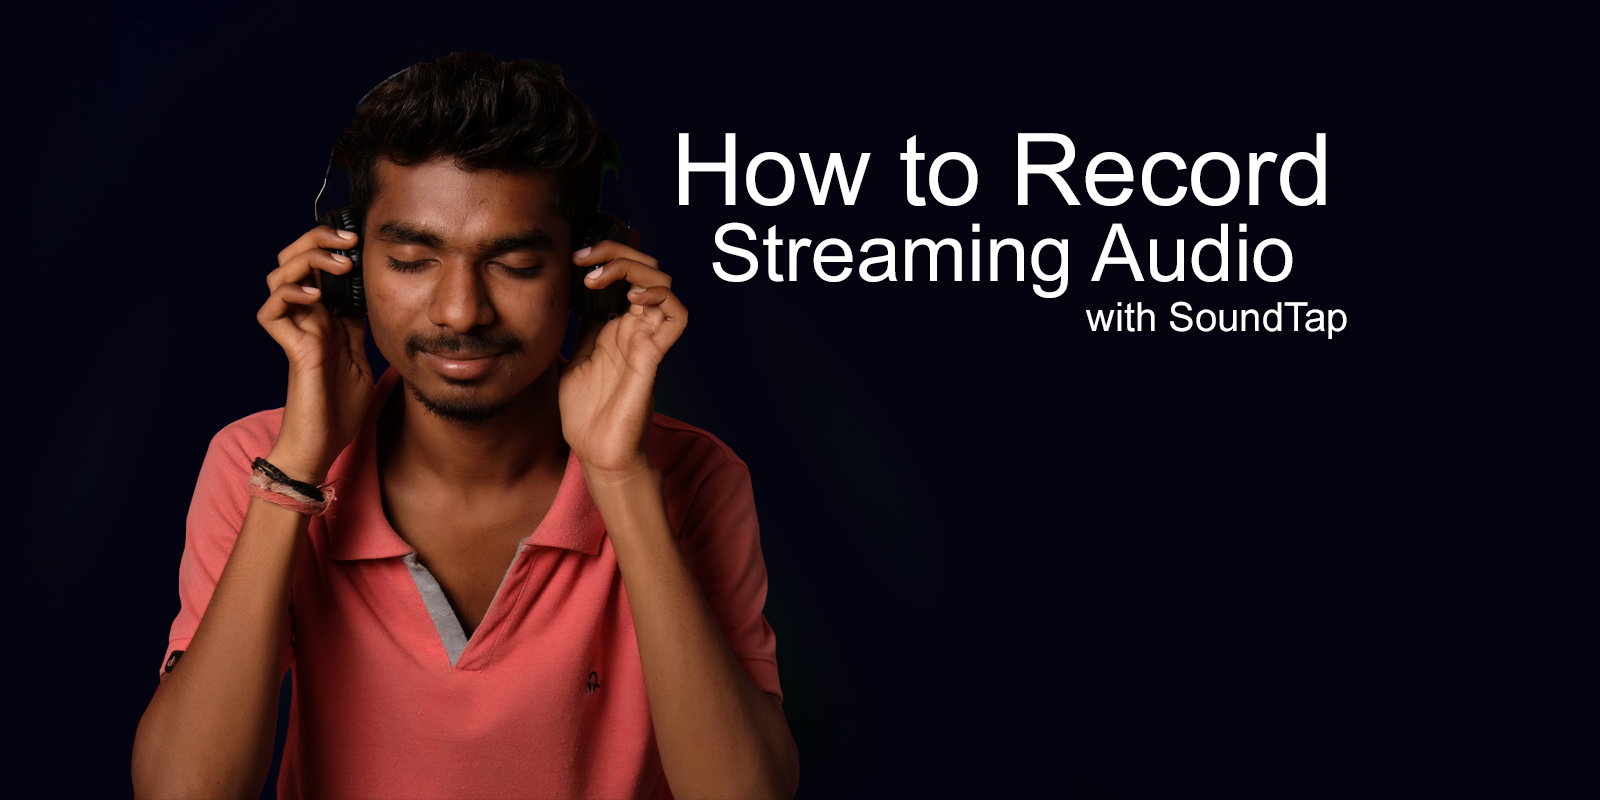 Record streaming live. To record. Audio streaming. SOUNDTAP.